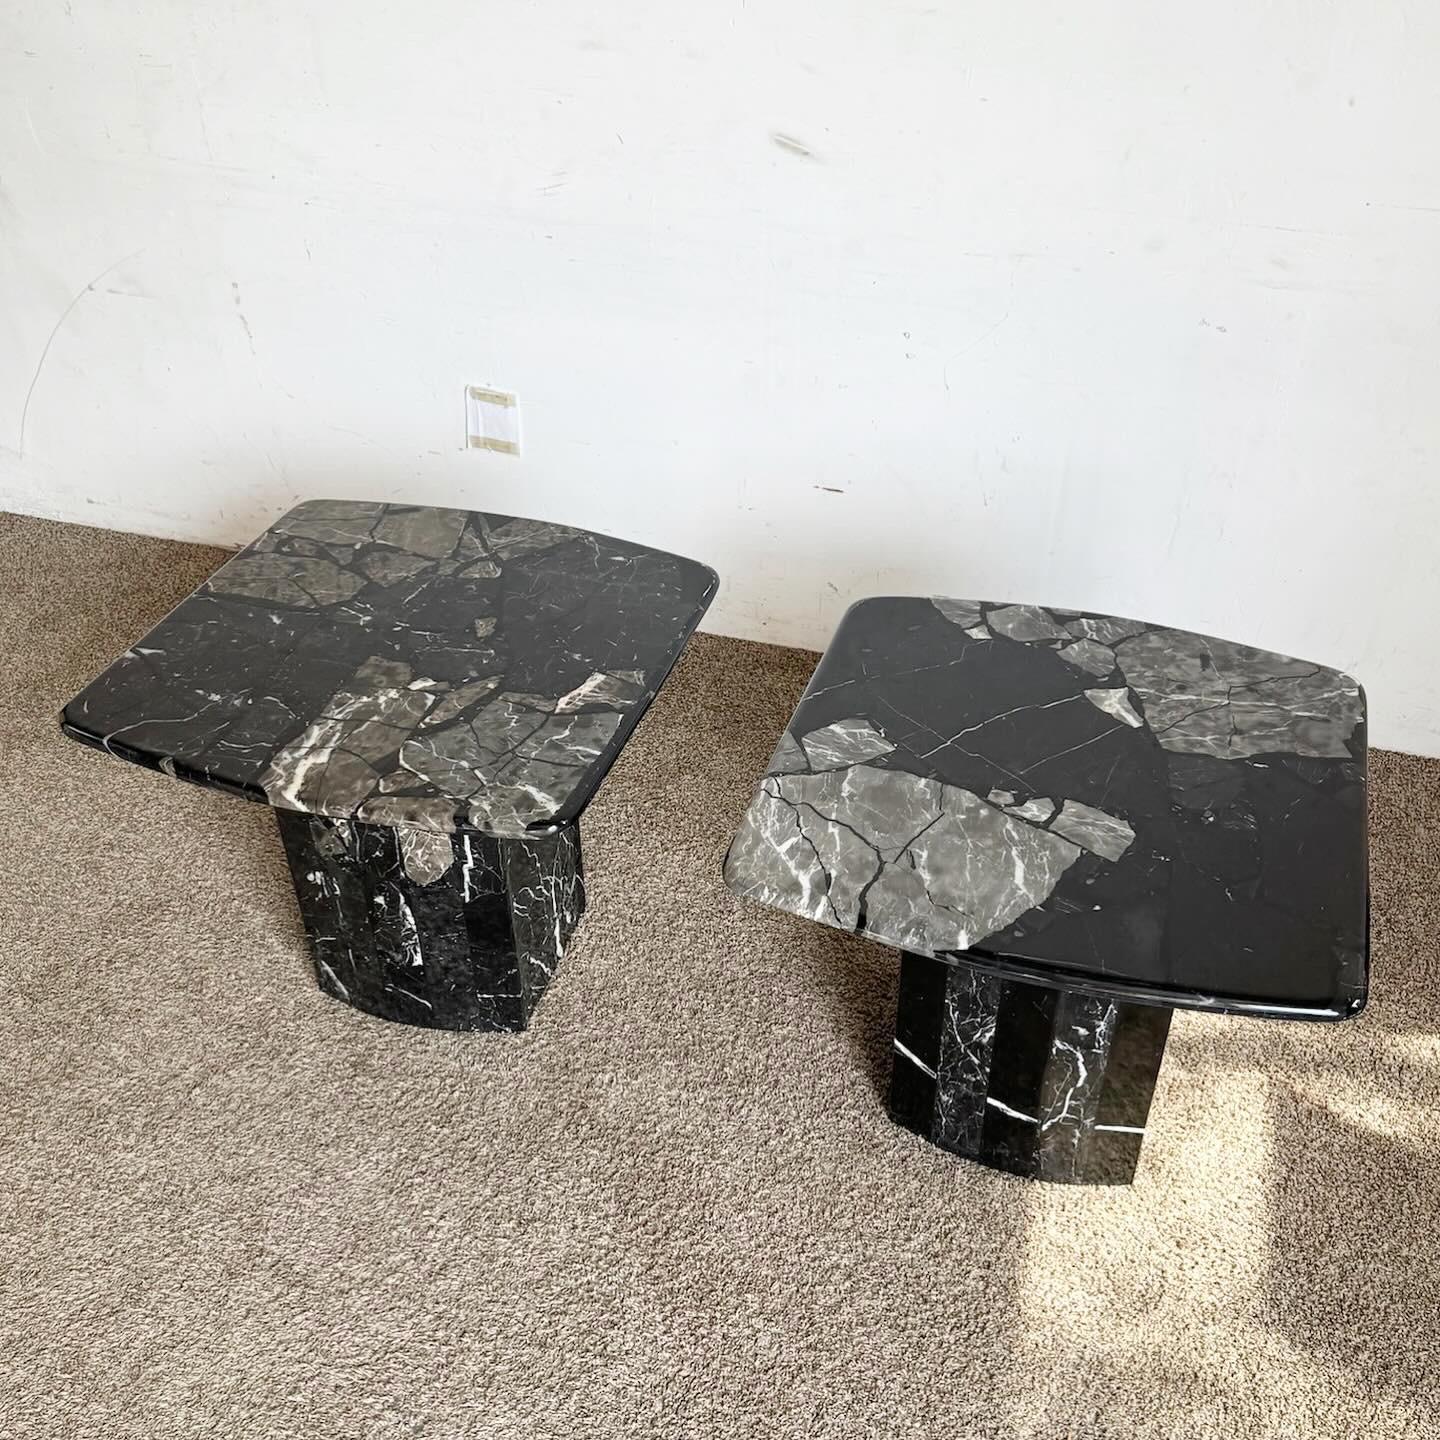 The Postmodern Black Marble Side Tables on scalloped bases, a pair, offer a striking blend of elegance and postmodern design. Each table features a luxurious black marble top with unique veining, supported by an artistic scalloped base. These side